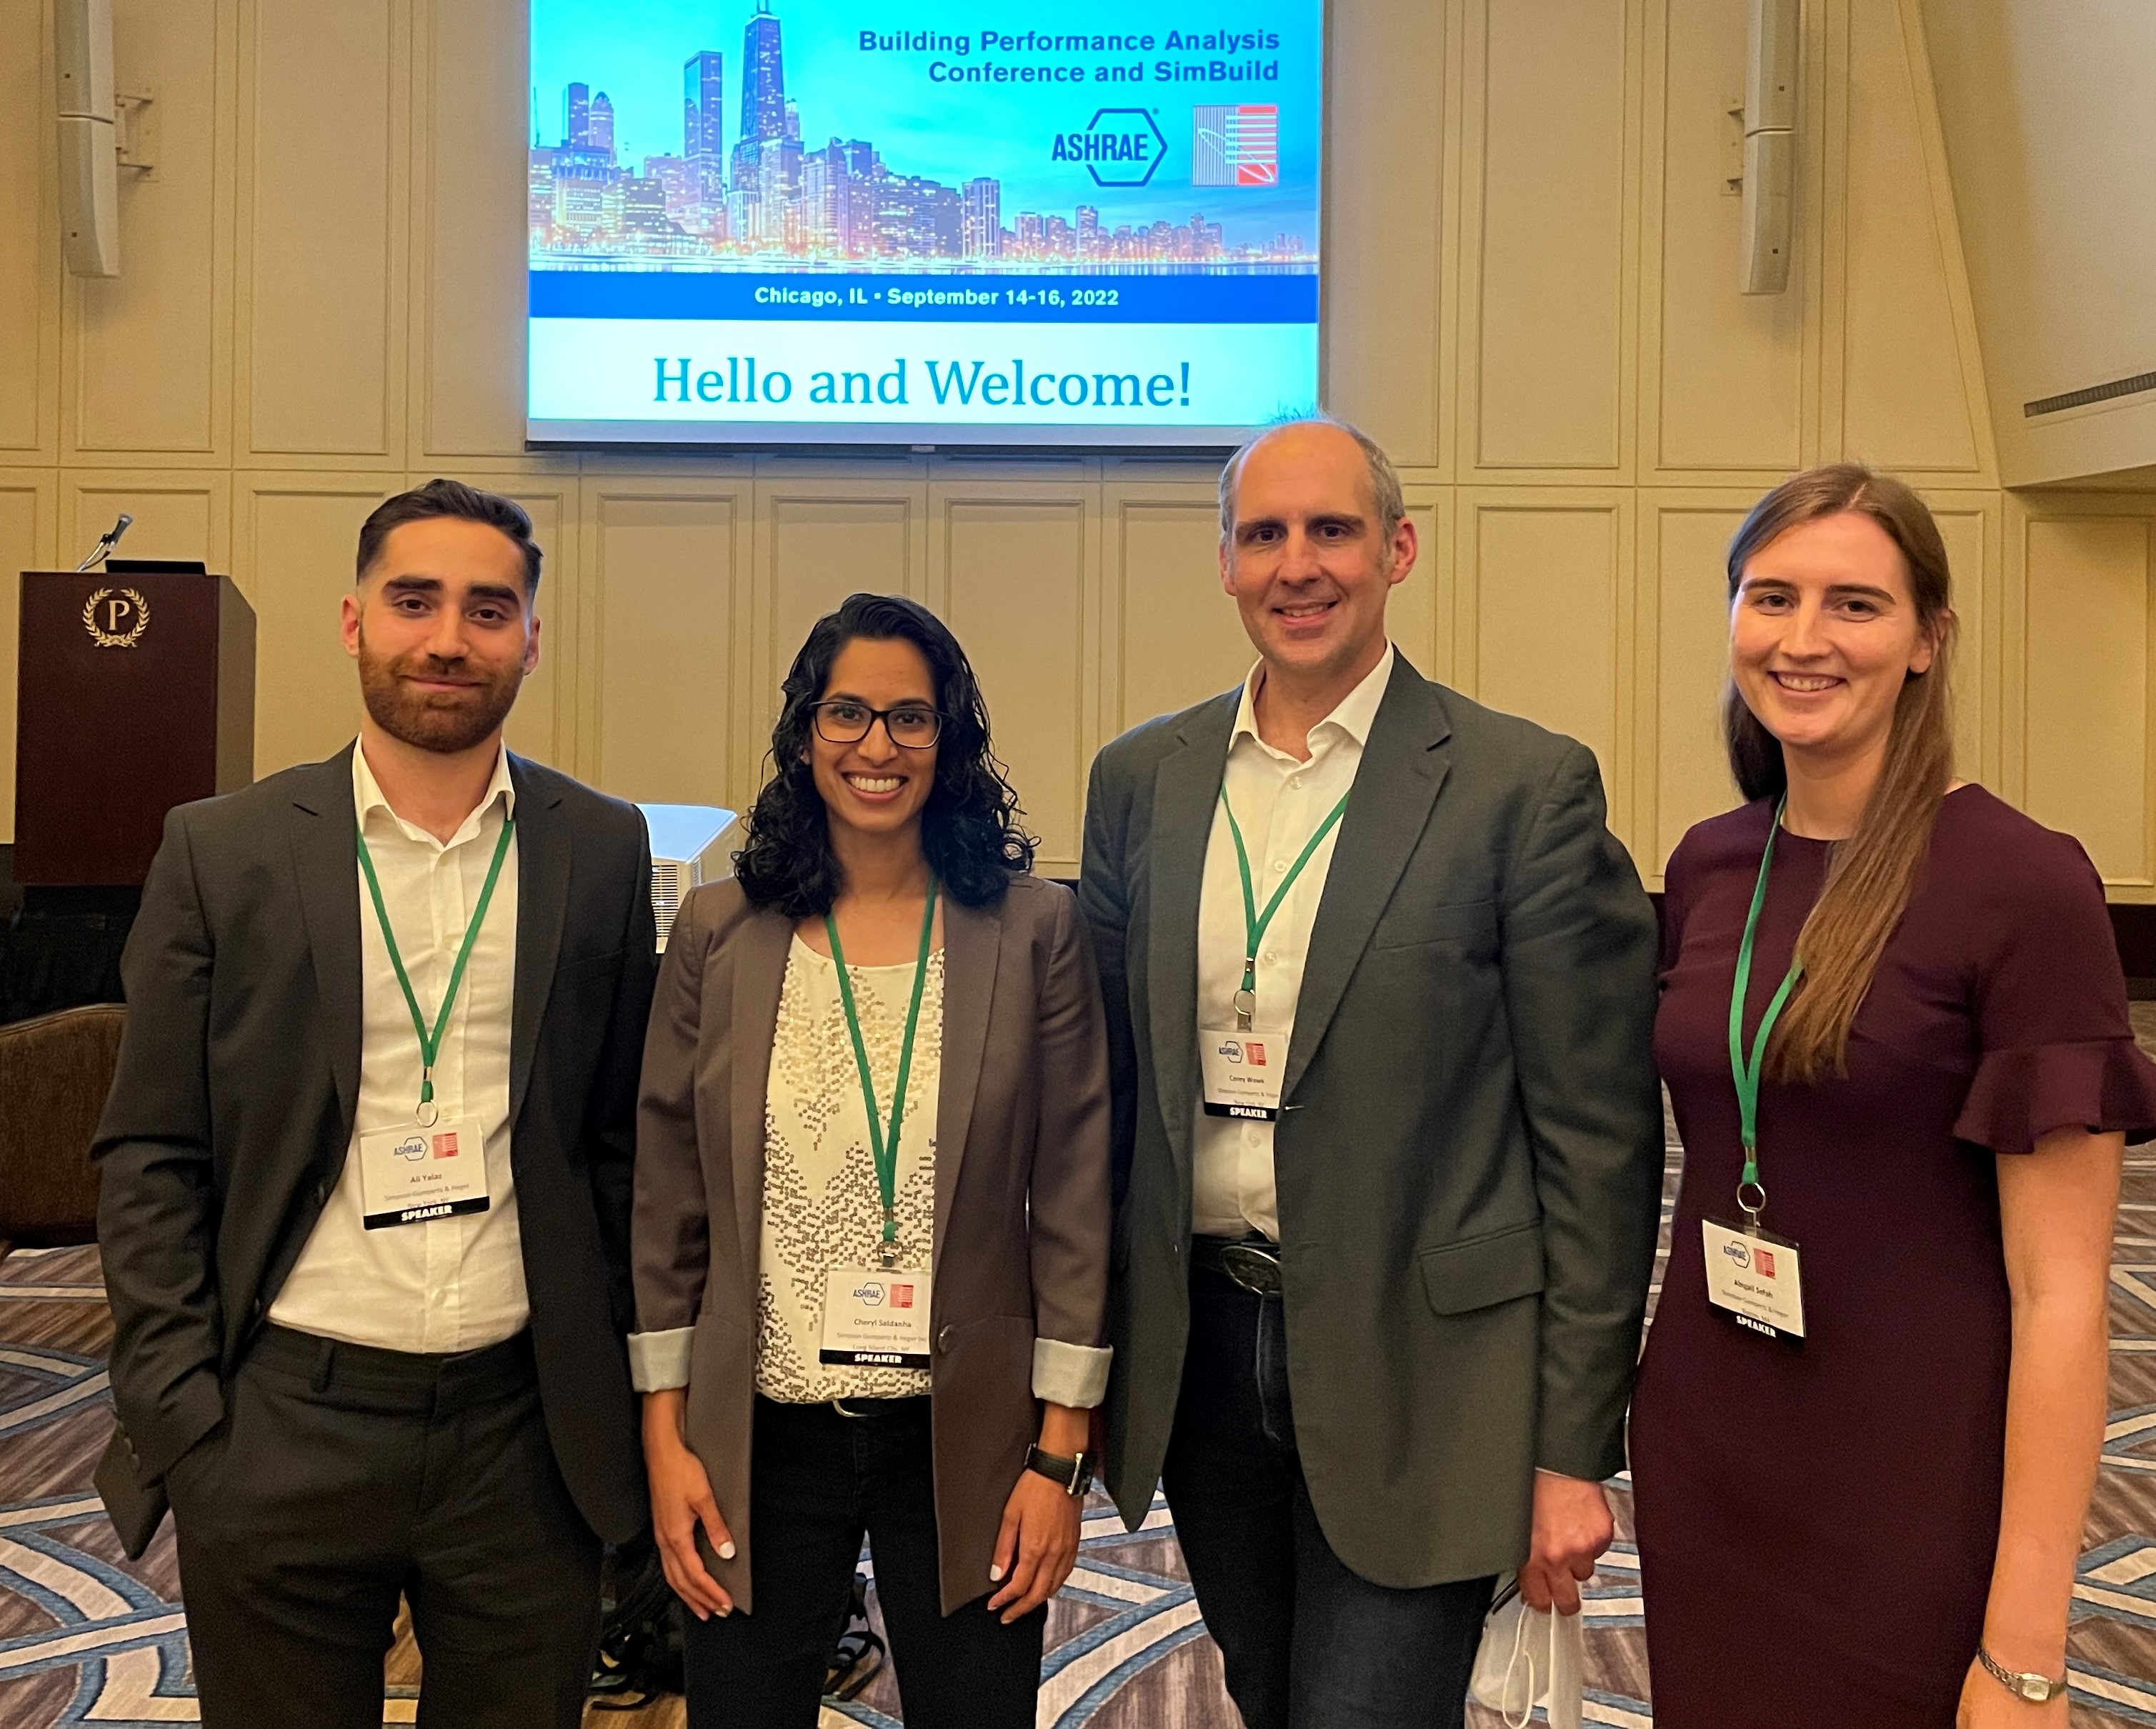 sgh_engineering on X: Last week, SGH's Cheryl Saldanha, Abigail Sefah,  Corey Wowk, and Ali Yalaz presented at an ASHRAE conference. They shared  information about life cycle cost analysis and building envelope performance